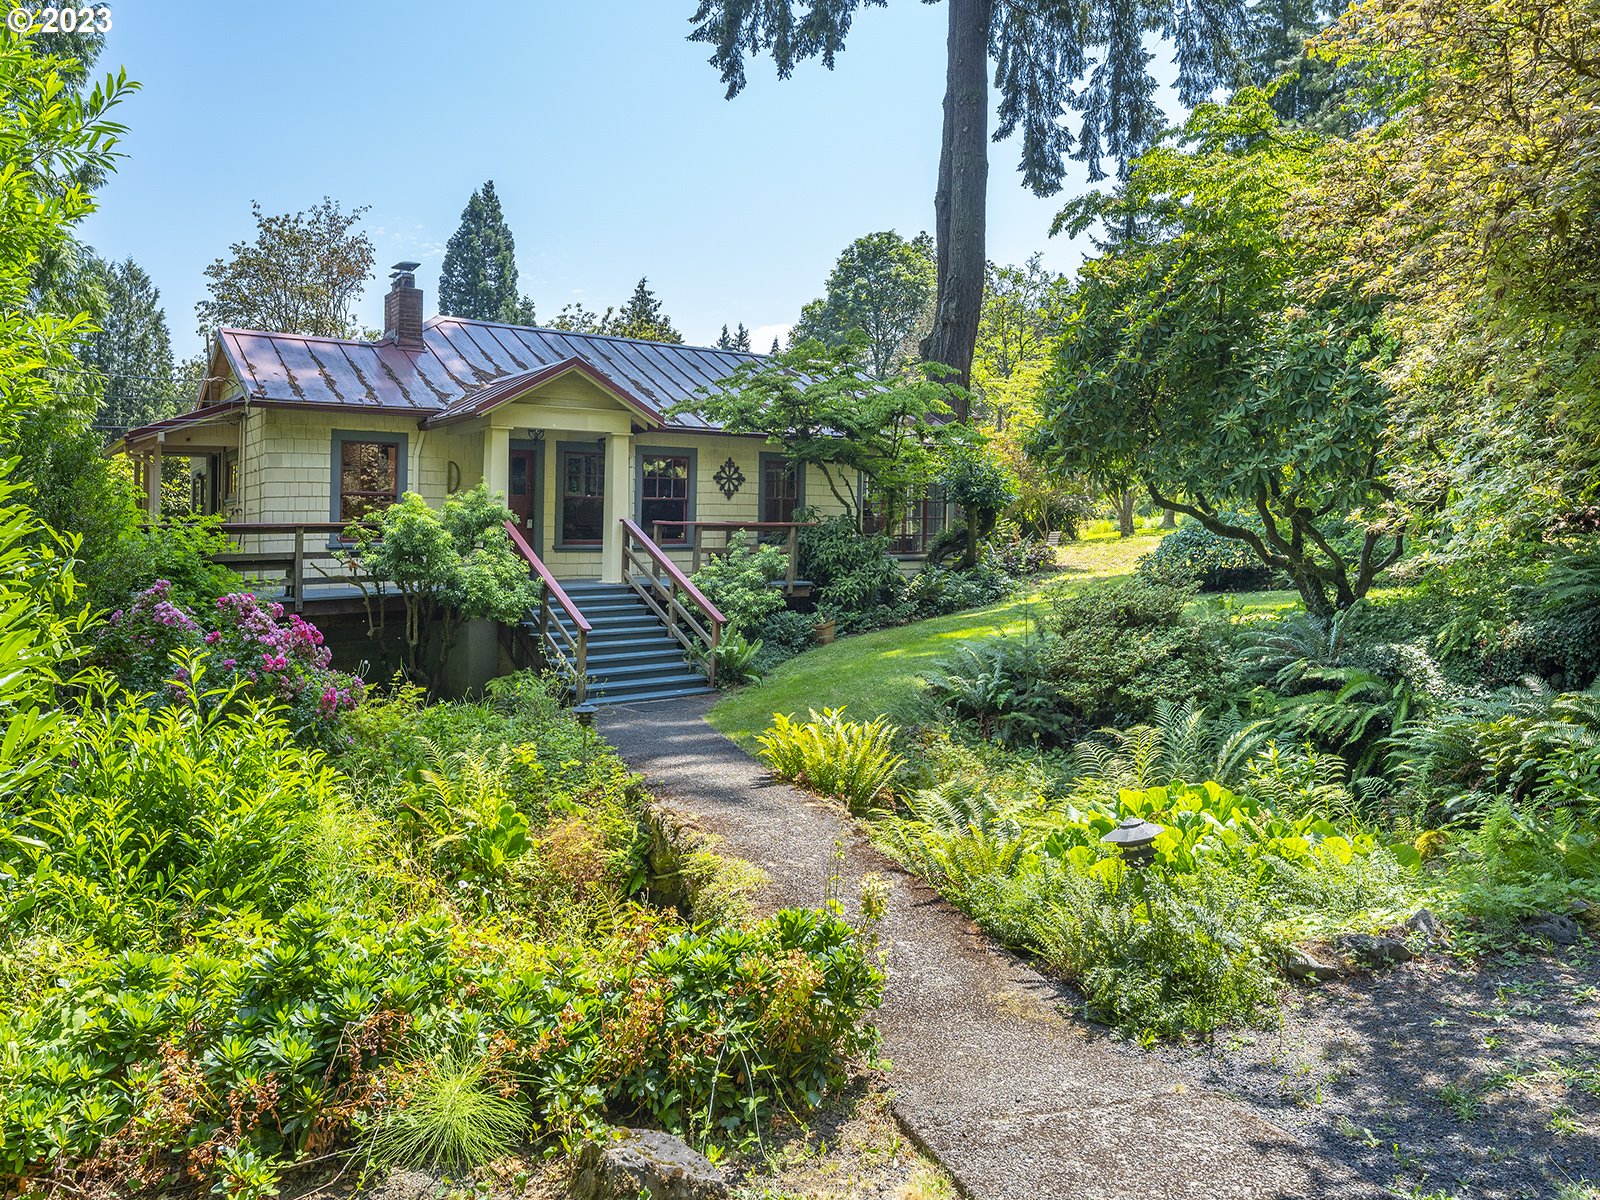 10434 S DAPHNE AVE, Portland, OR 97219